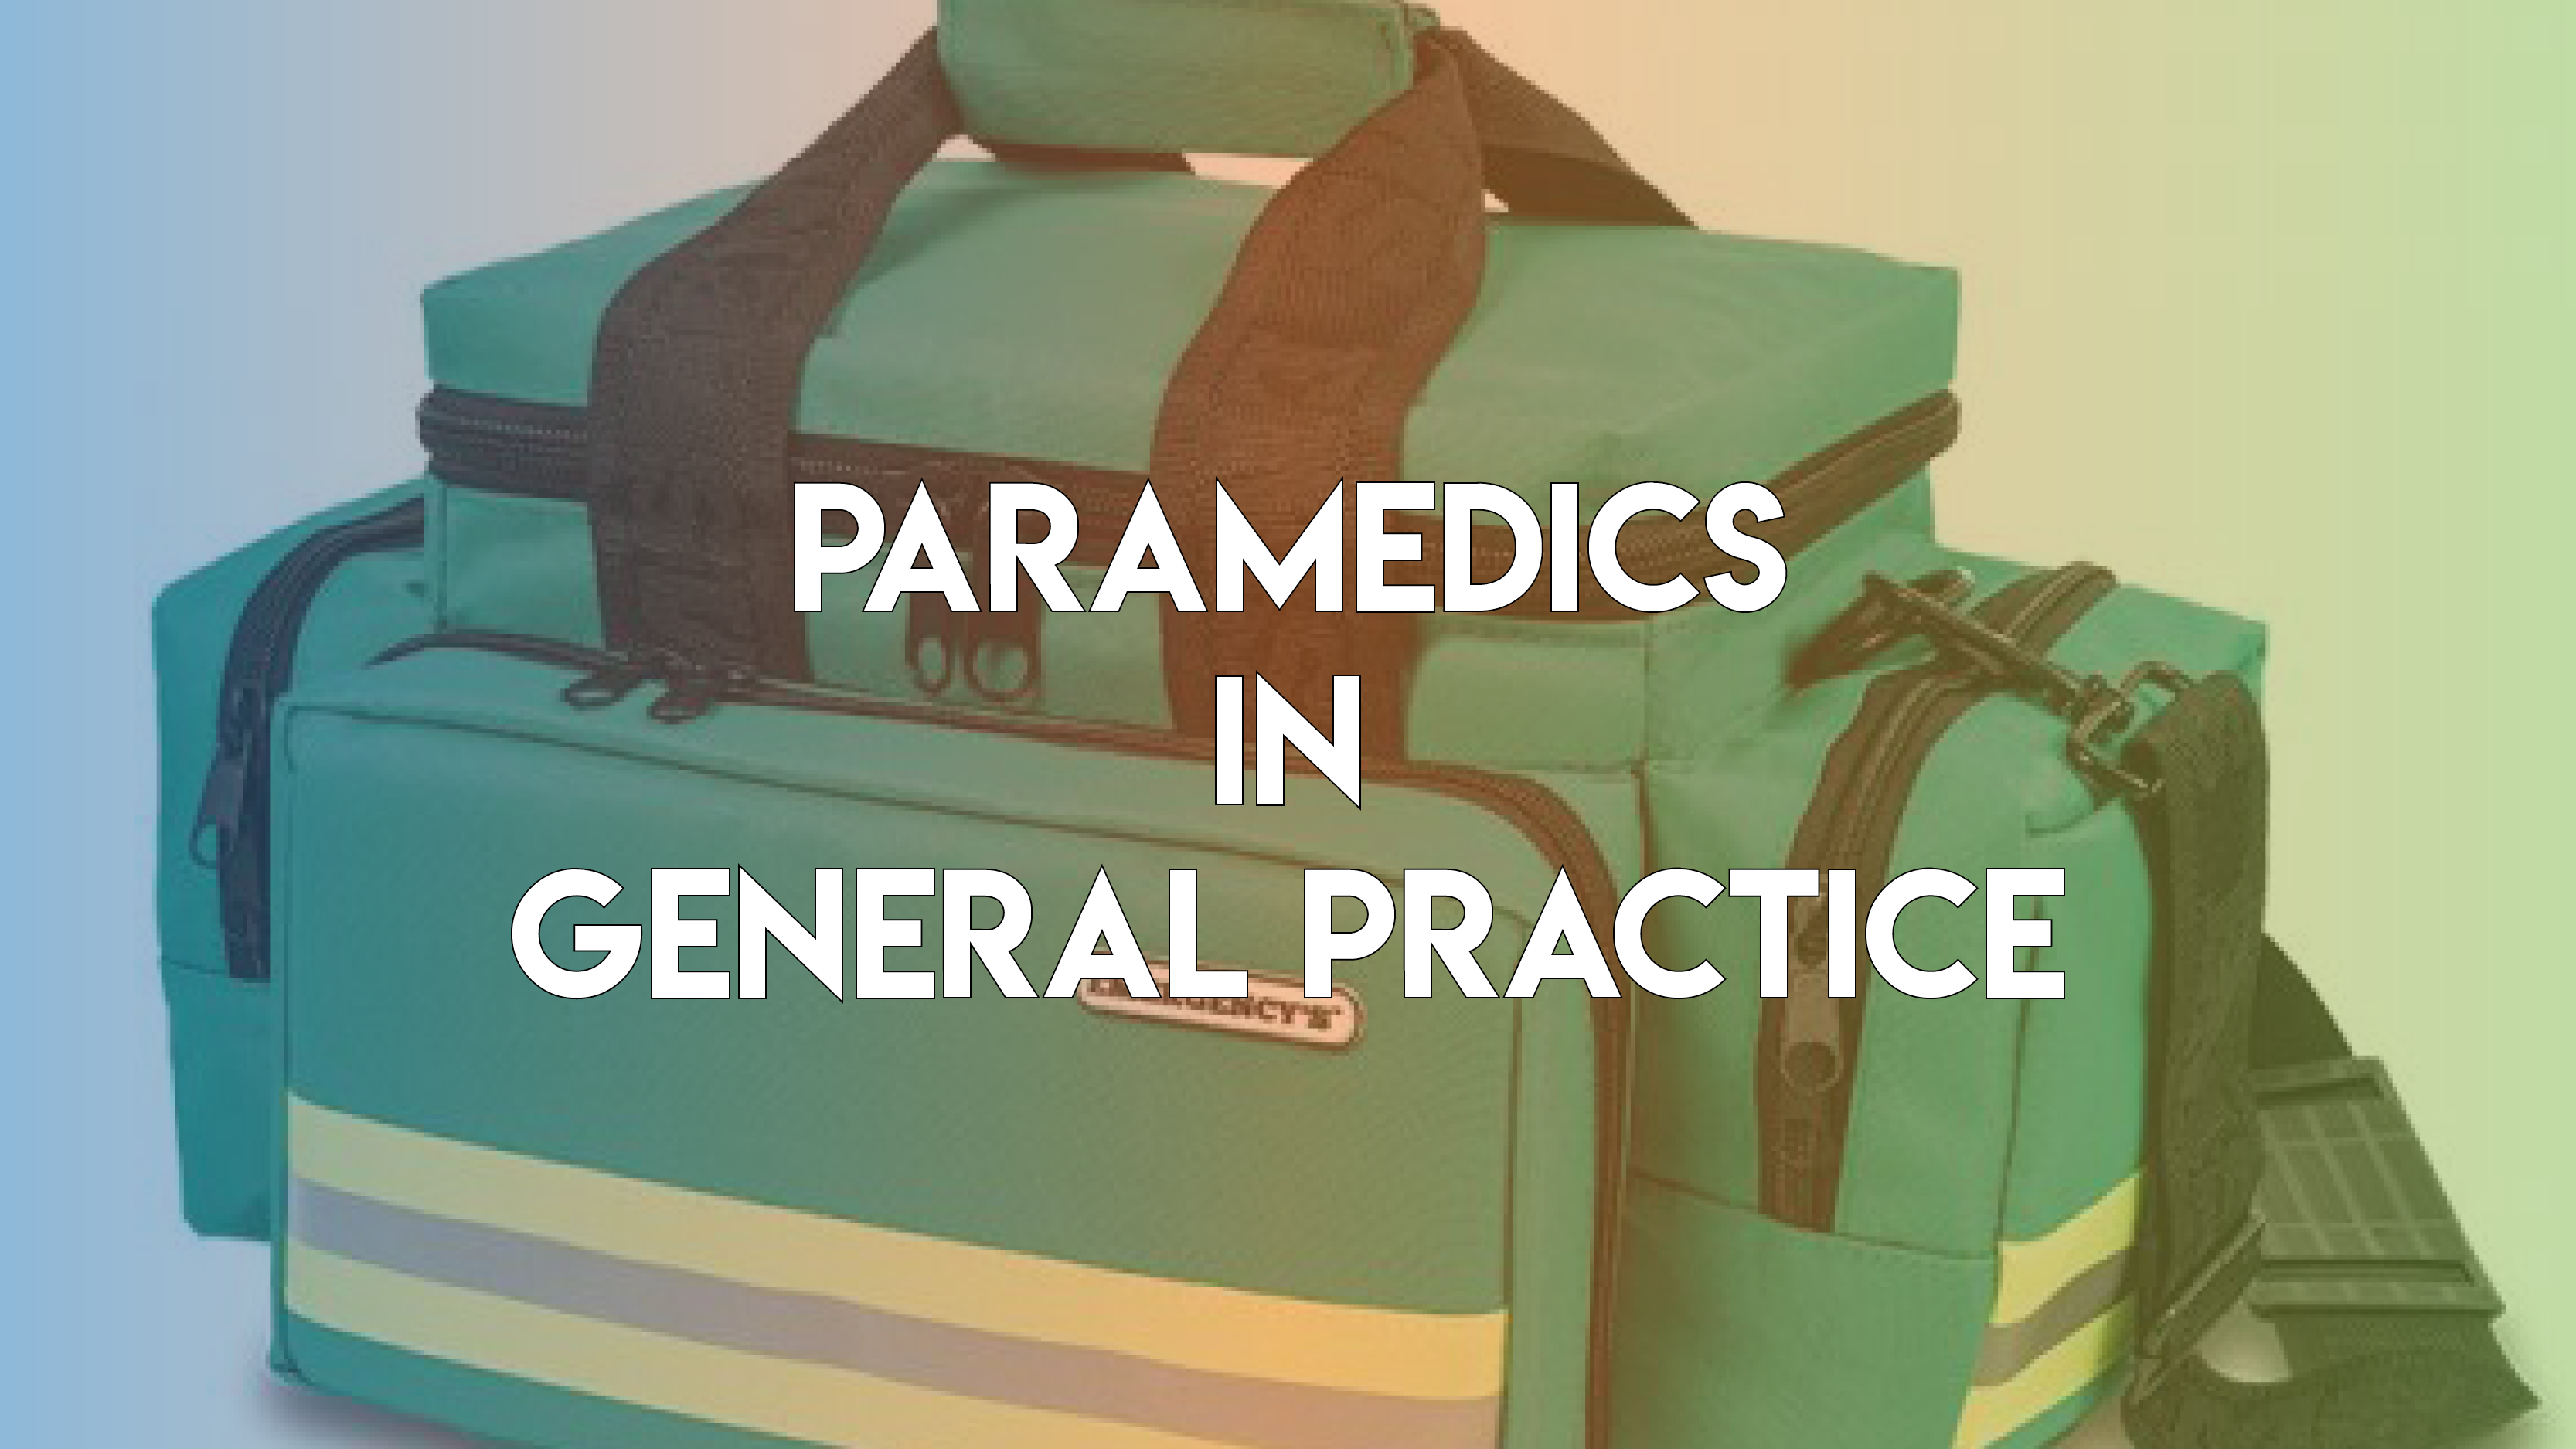 a green paramedic bag in the background with the words 'Paramedics in General Practice' in the front.